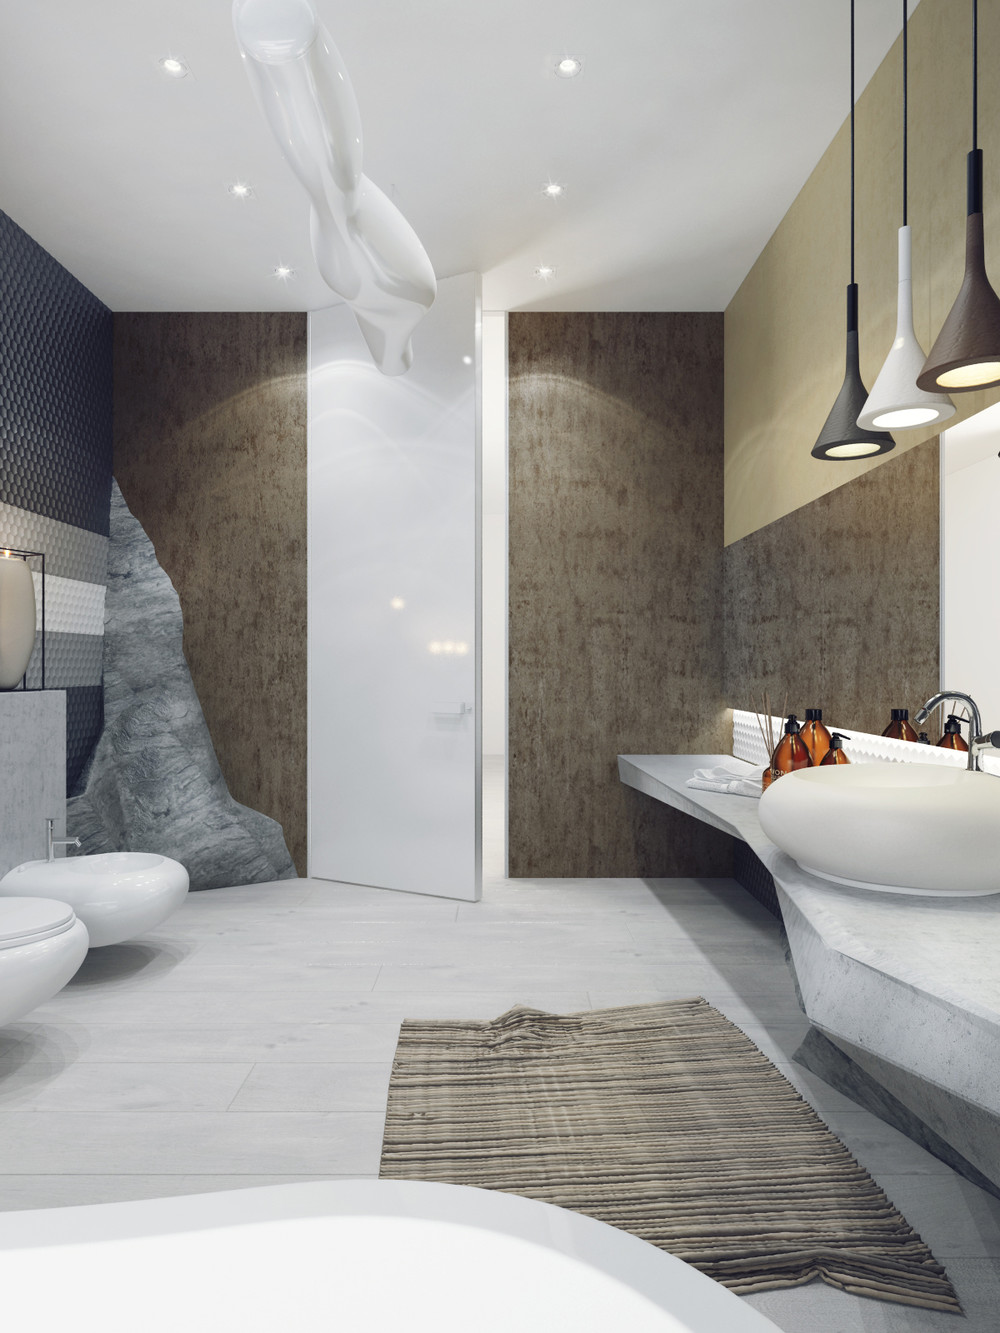 Bathroom designs with creative decor "width =" 1000 "height =" 1333 "srcset =" https://mileray.com/wp-content/uploads/2020/05/1588514866_440_Luxury-Bathroom-Designs-In-High-Details-With-Creative-Decor-Ideas.jpg 1000w, https: / /mileray.com/wp-content/uploads/2016/08/Jesters-Philip-and-Catherine5-225x300.jpg 225w, https://mileray.com/wp-content/uploads/2016/08/Jesters-Philip - and-Catherine5-768x1024.jpg 768w, https://mileray.com/wp-content/uploads/2016/08/Jesters-Philip-and-Catherine5-696x928.jpg 696w, https://mileray.com/wp - content / uploads / 2016/08 / Jesters-Philip-and-Catherine5-315x420.jpg 315w "sizes =" (maximum width: 1000px) 100vw, 1000px